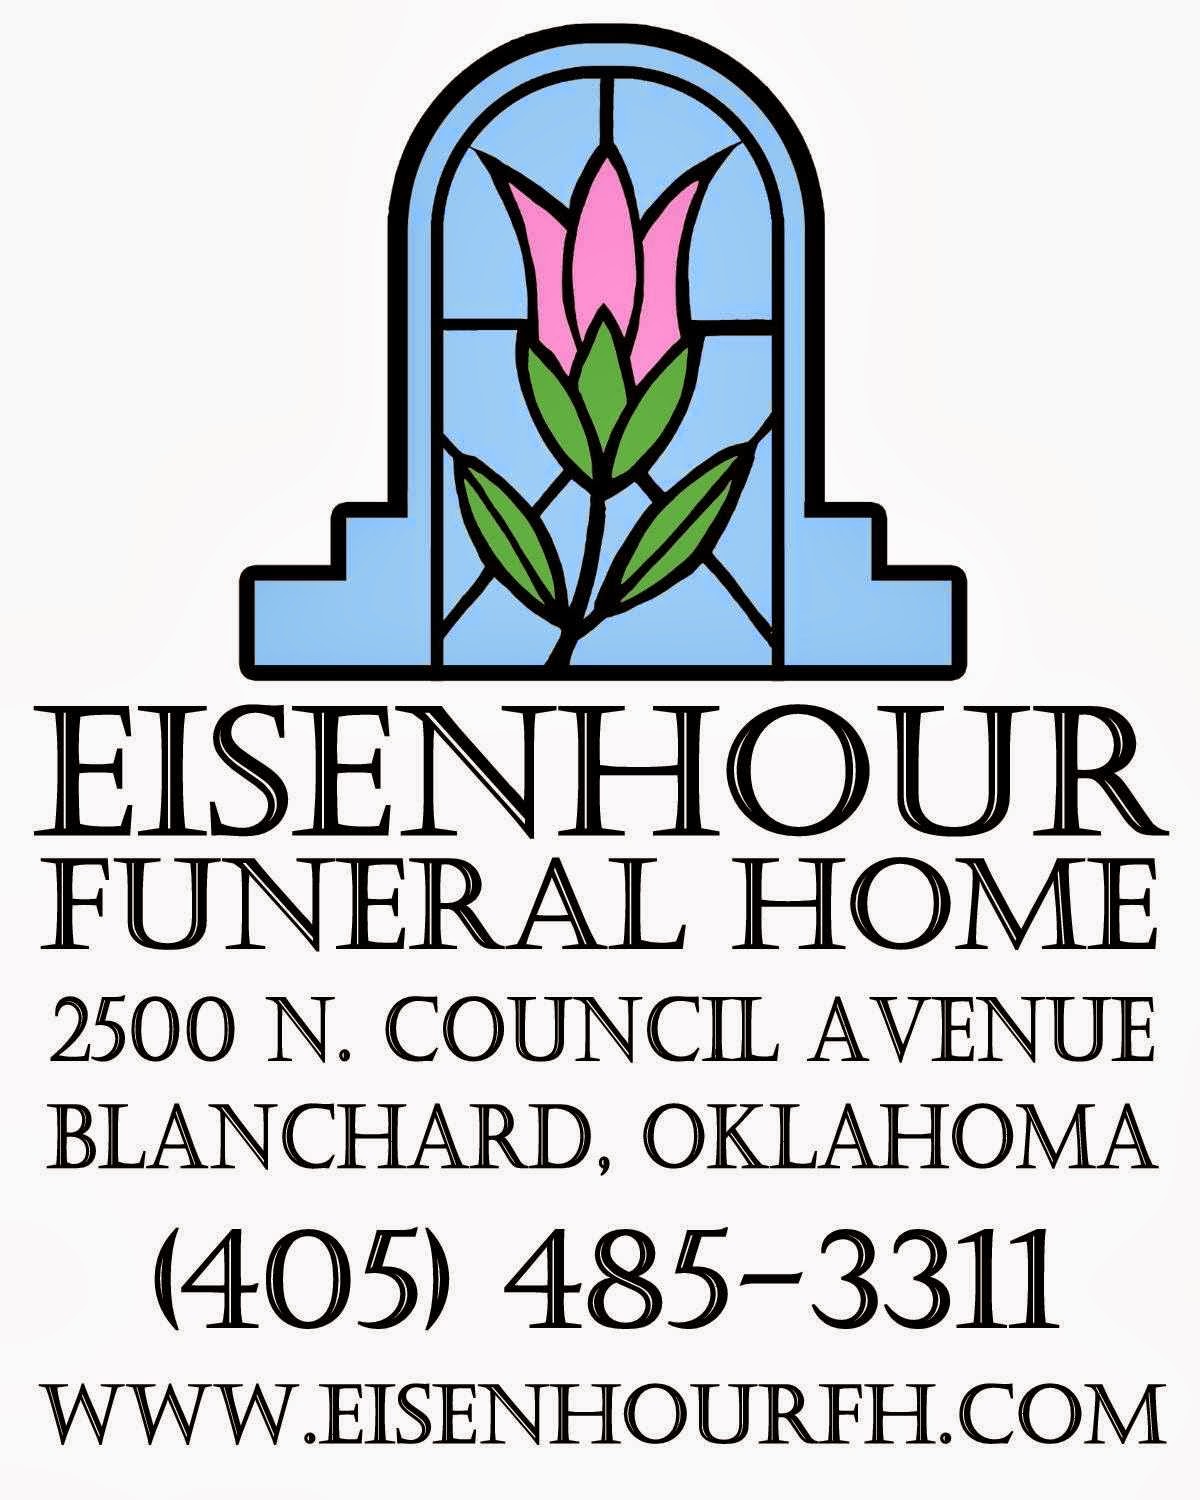 Eisenhour Funeral Home 2500 N Council Ave, Blanchard Oklahoma 73010